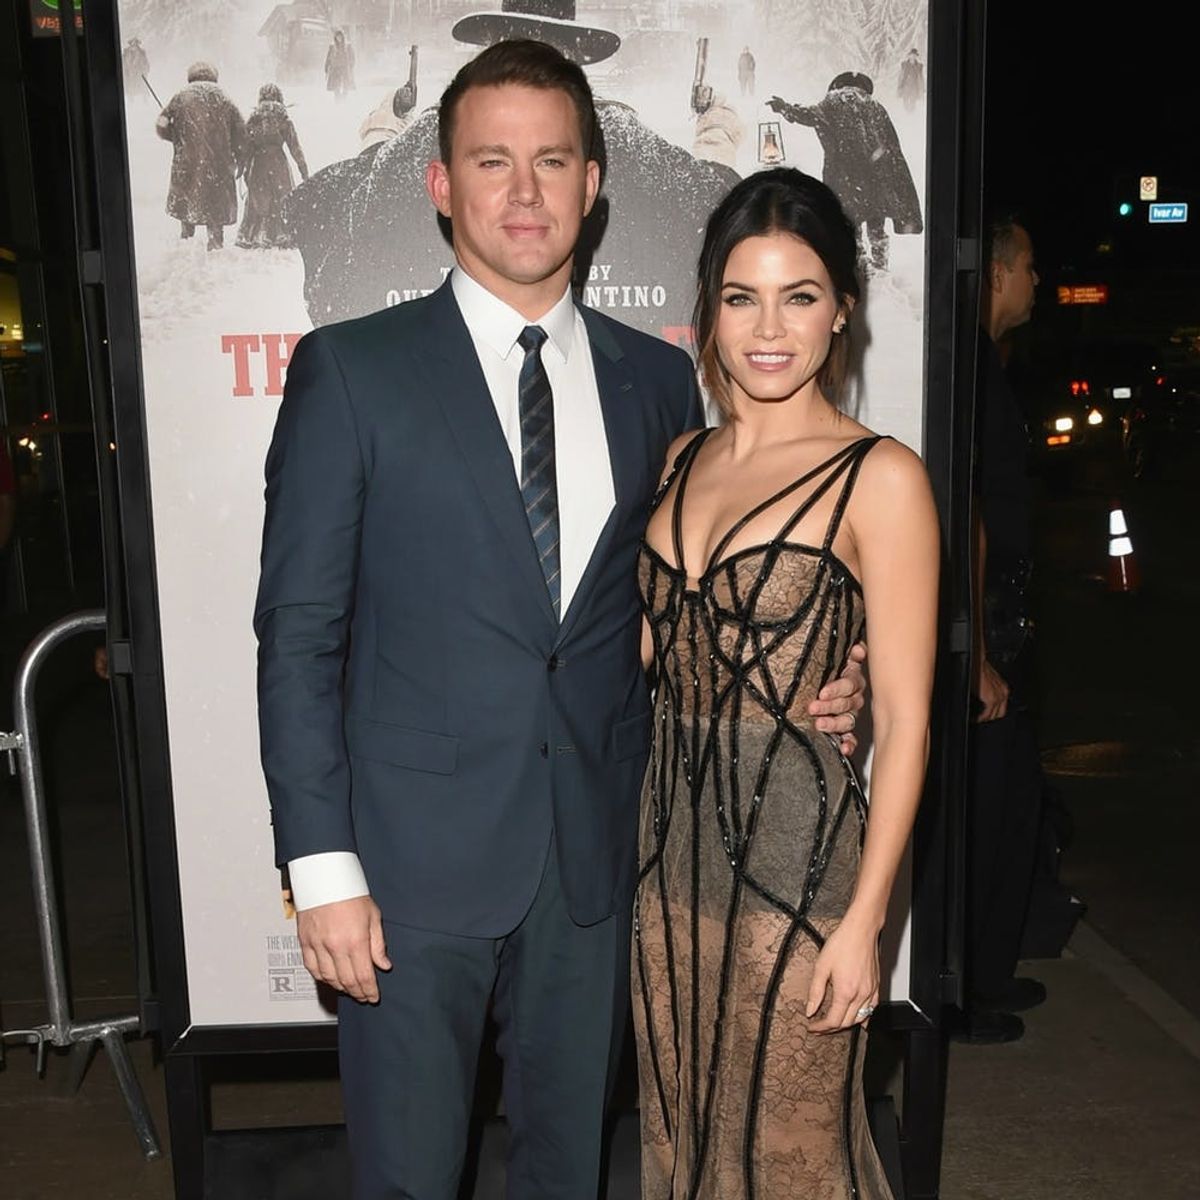 Channing Tatum’s Mother’s Day Tribute to Jenna-Dewan Tatum Will Make You Cry